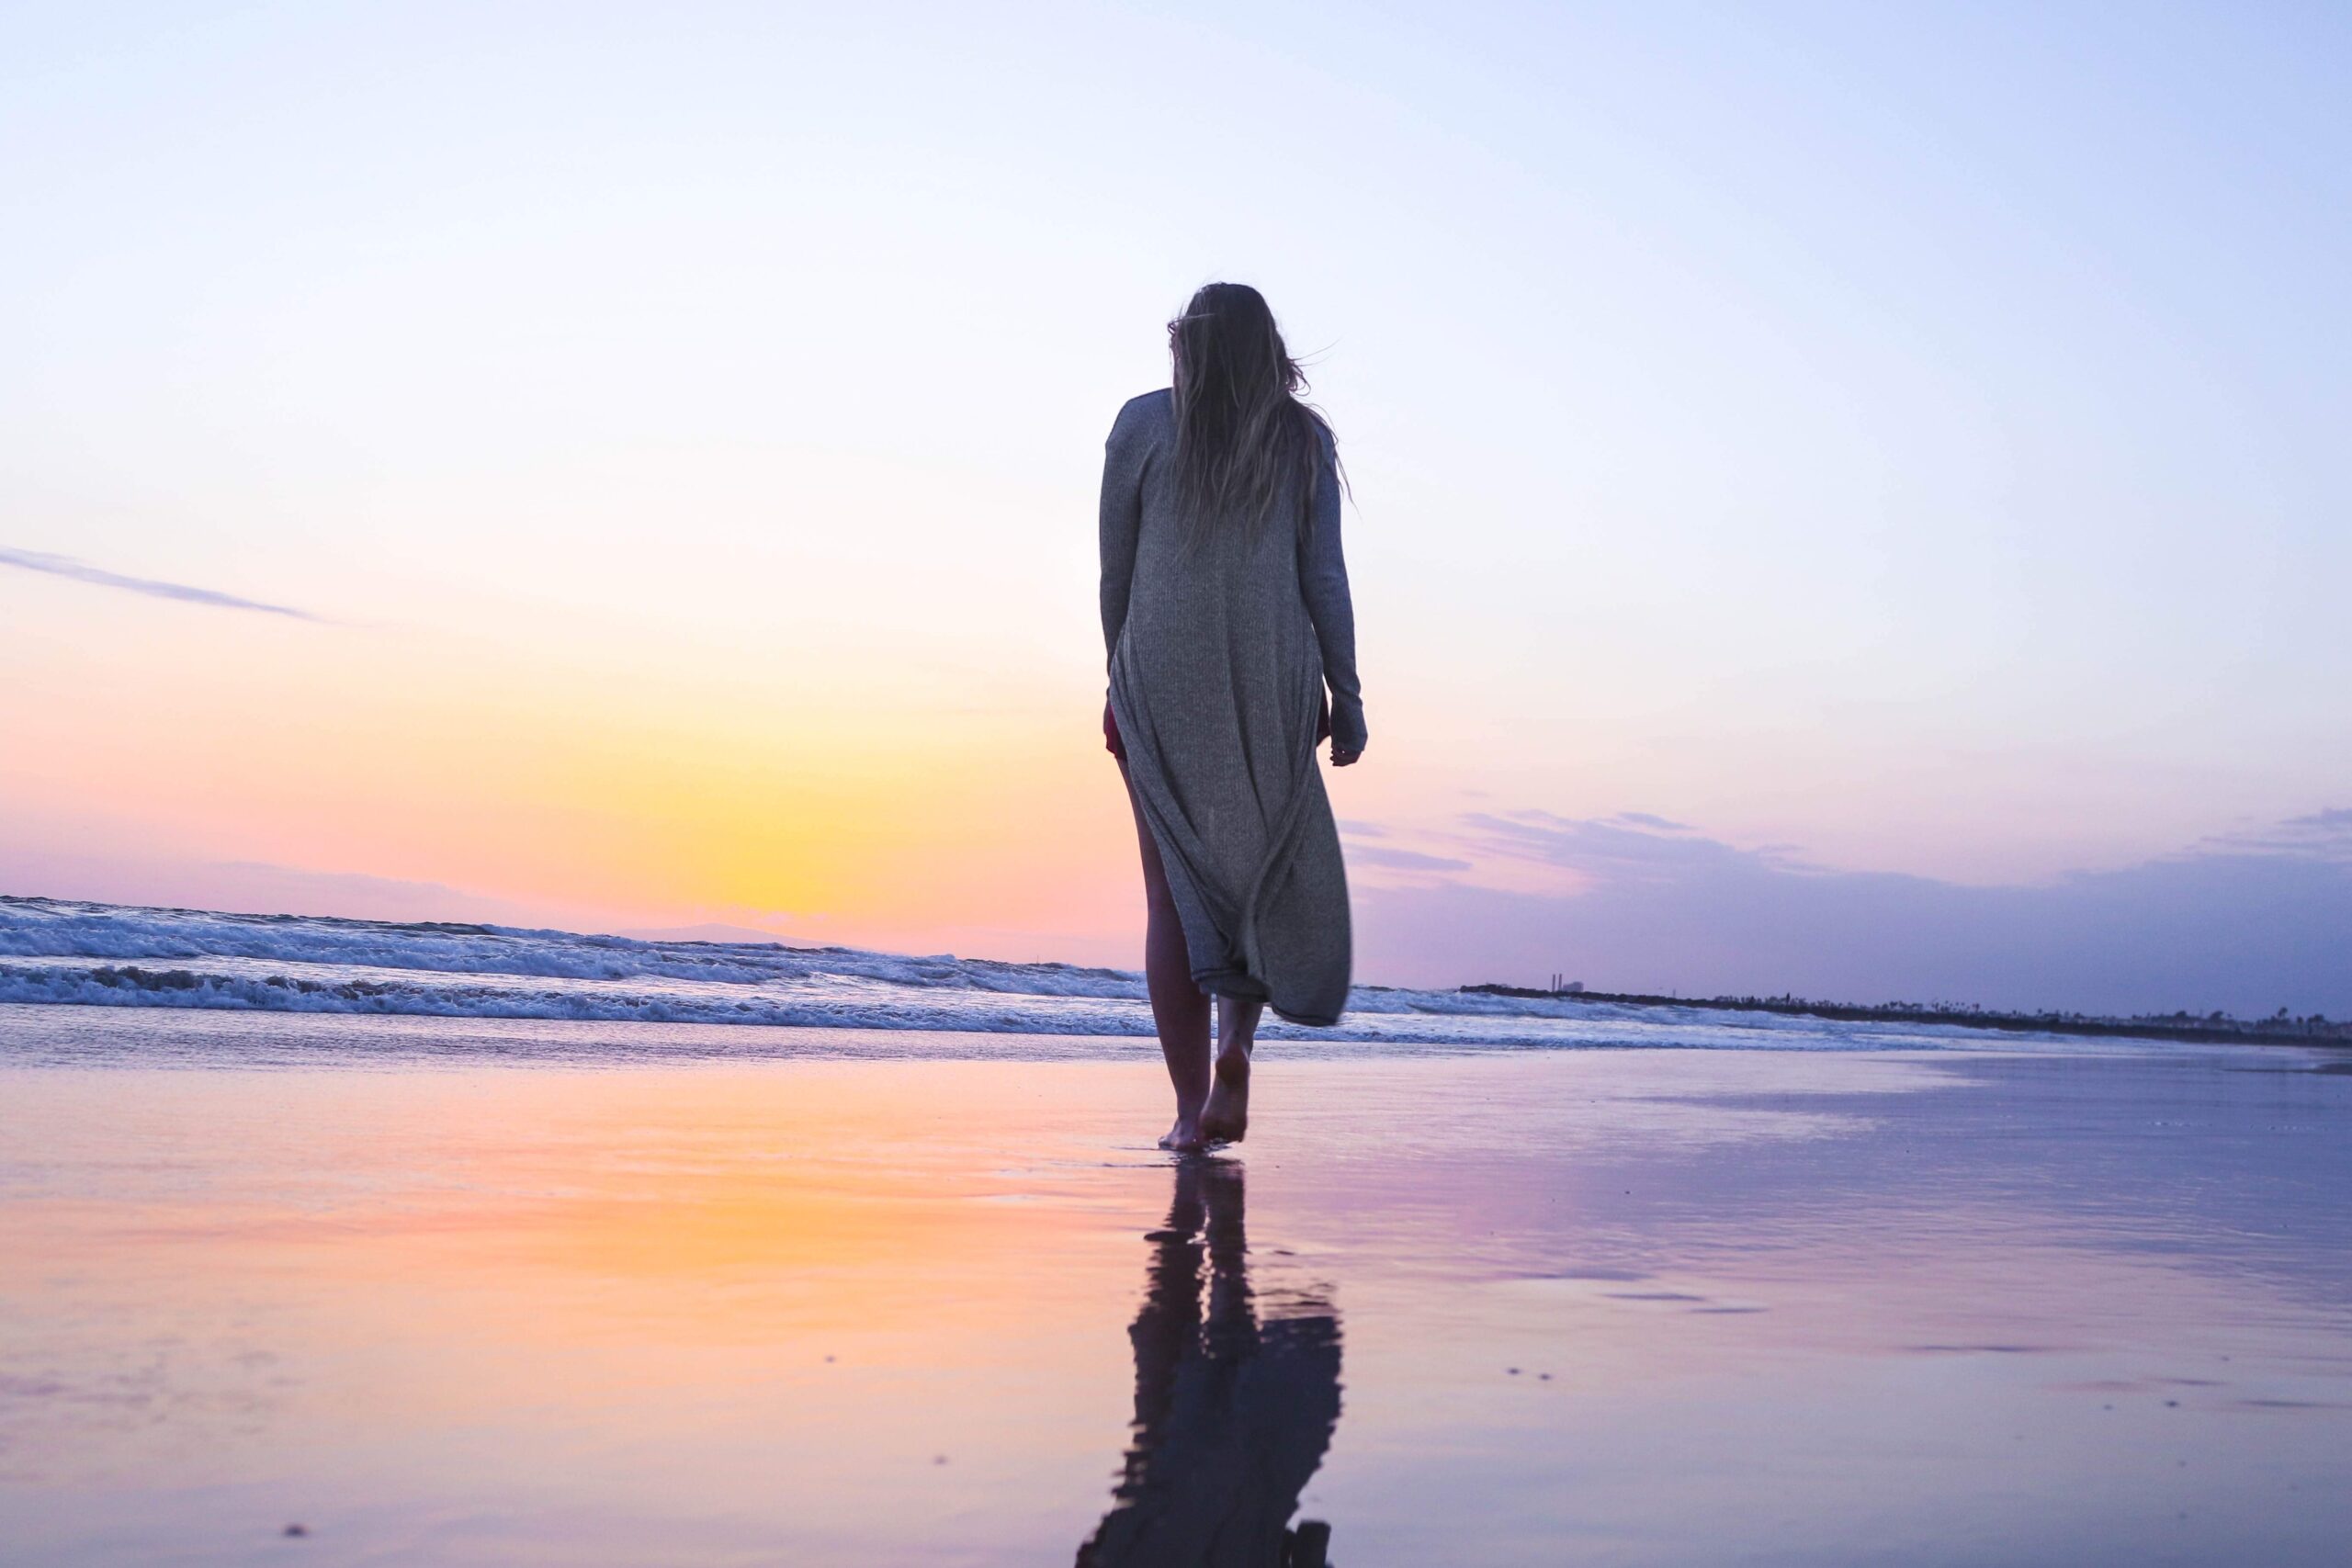 Image of a woman walking alone along the beach during sunset. With the help of a skilled grief counselor in Saint Petersburg, FL you can find support to begin coping with your grief.